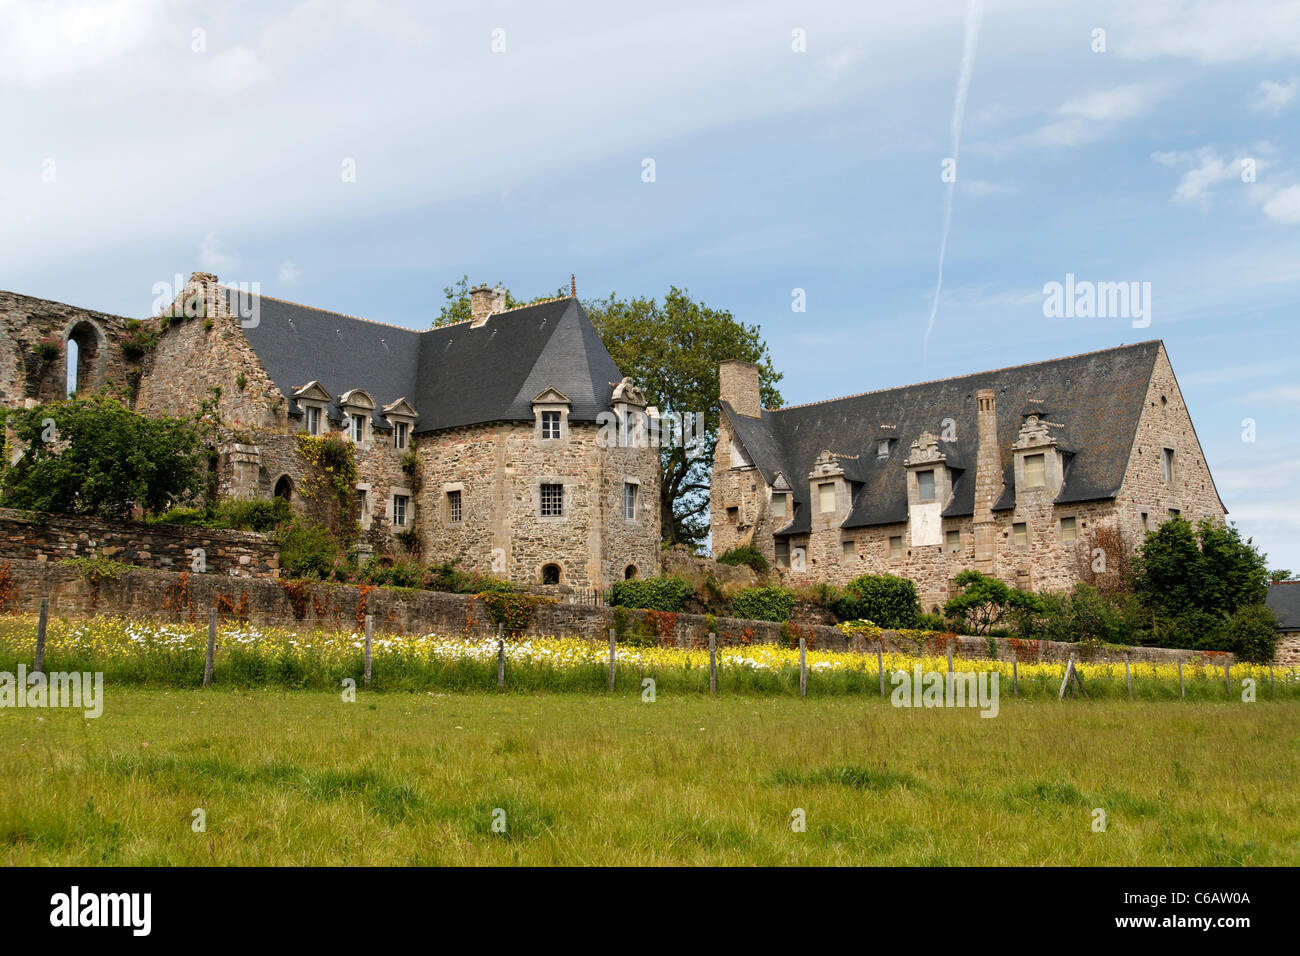 Beauport abbaye, 13th century, become a cultural site and tourist (Paimpol, Côtes d'Armor, Brittany, France). Stock Photo